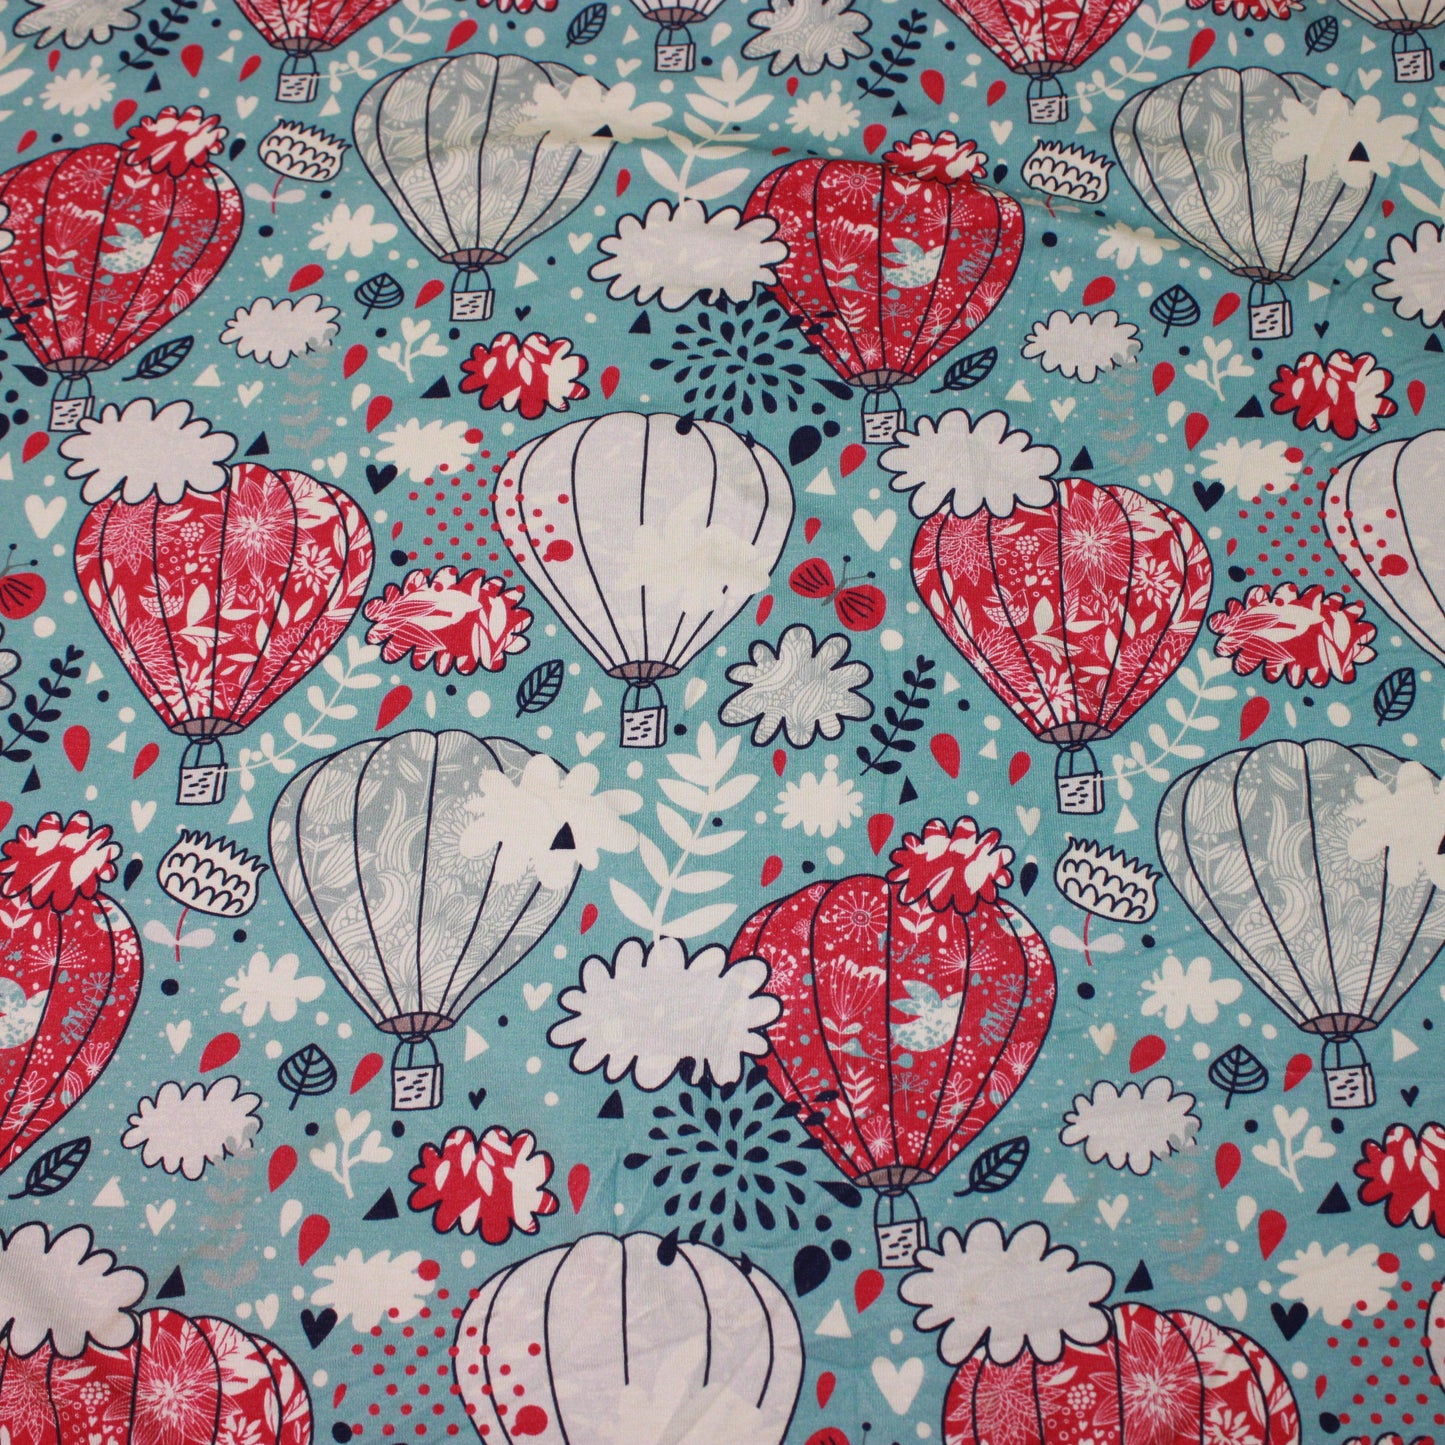 Sketched Hot Air Balloons on Bamboo/Spandex Jersey Fabric - Nature's Fabrics